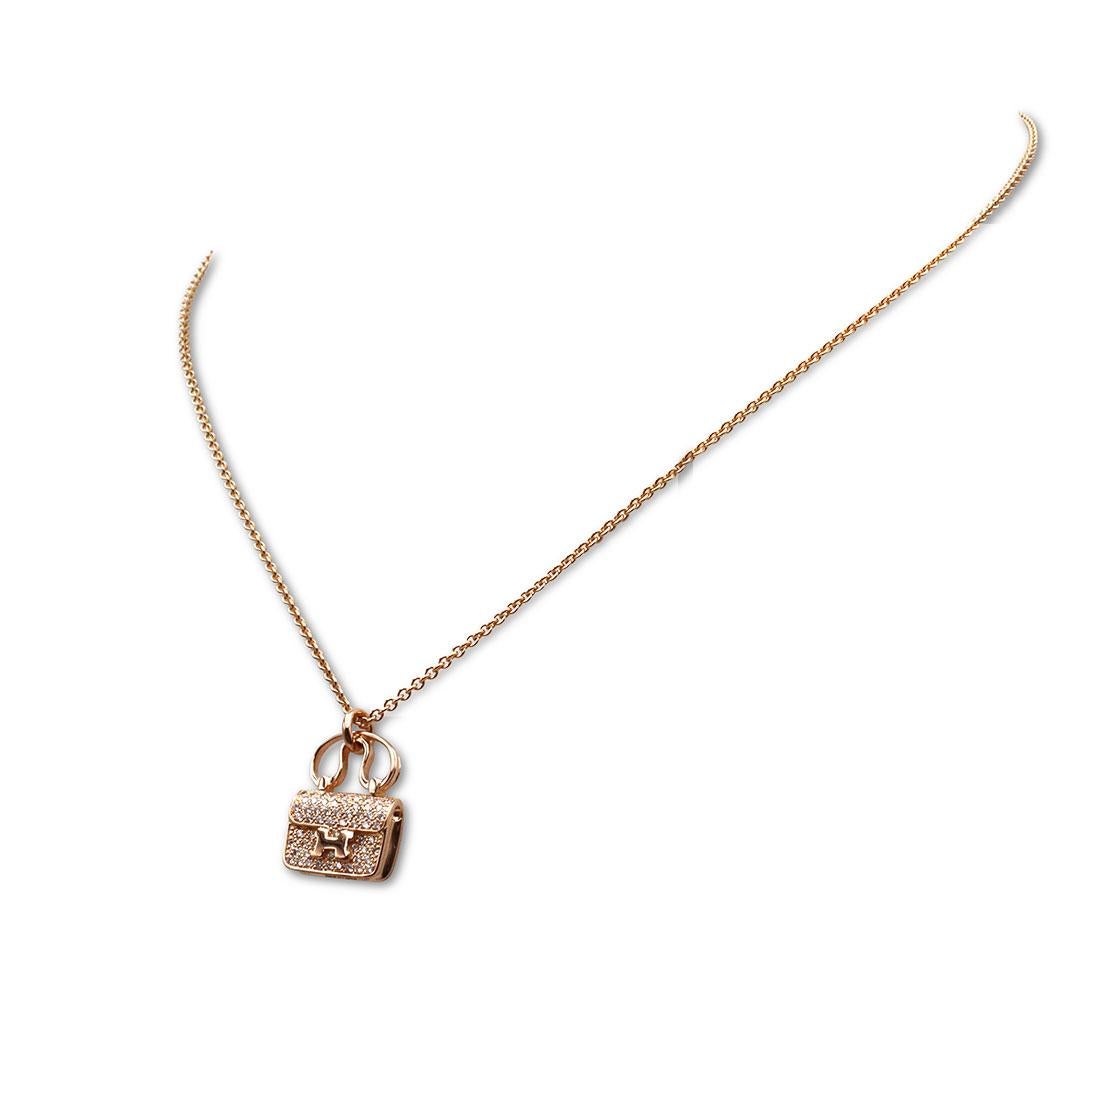 Authentic Hermès Constance Amulette pendant necklace crafted in 18 karat rose gold. The pendant is designed as an Hermès Constance handbag set with round brilliant cut diamonds carrying an estimated .29 total carat weight. The pendant hangs from an